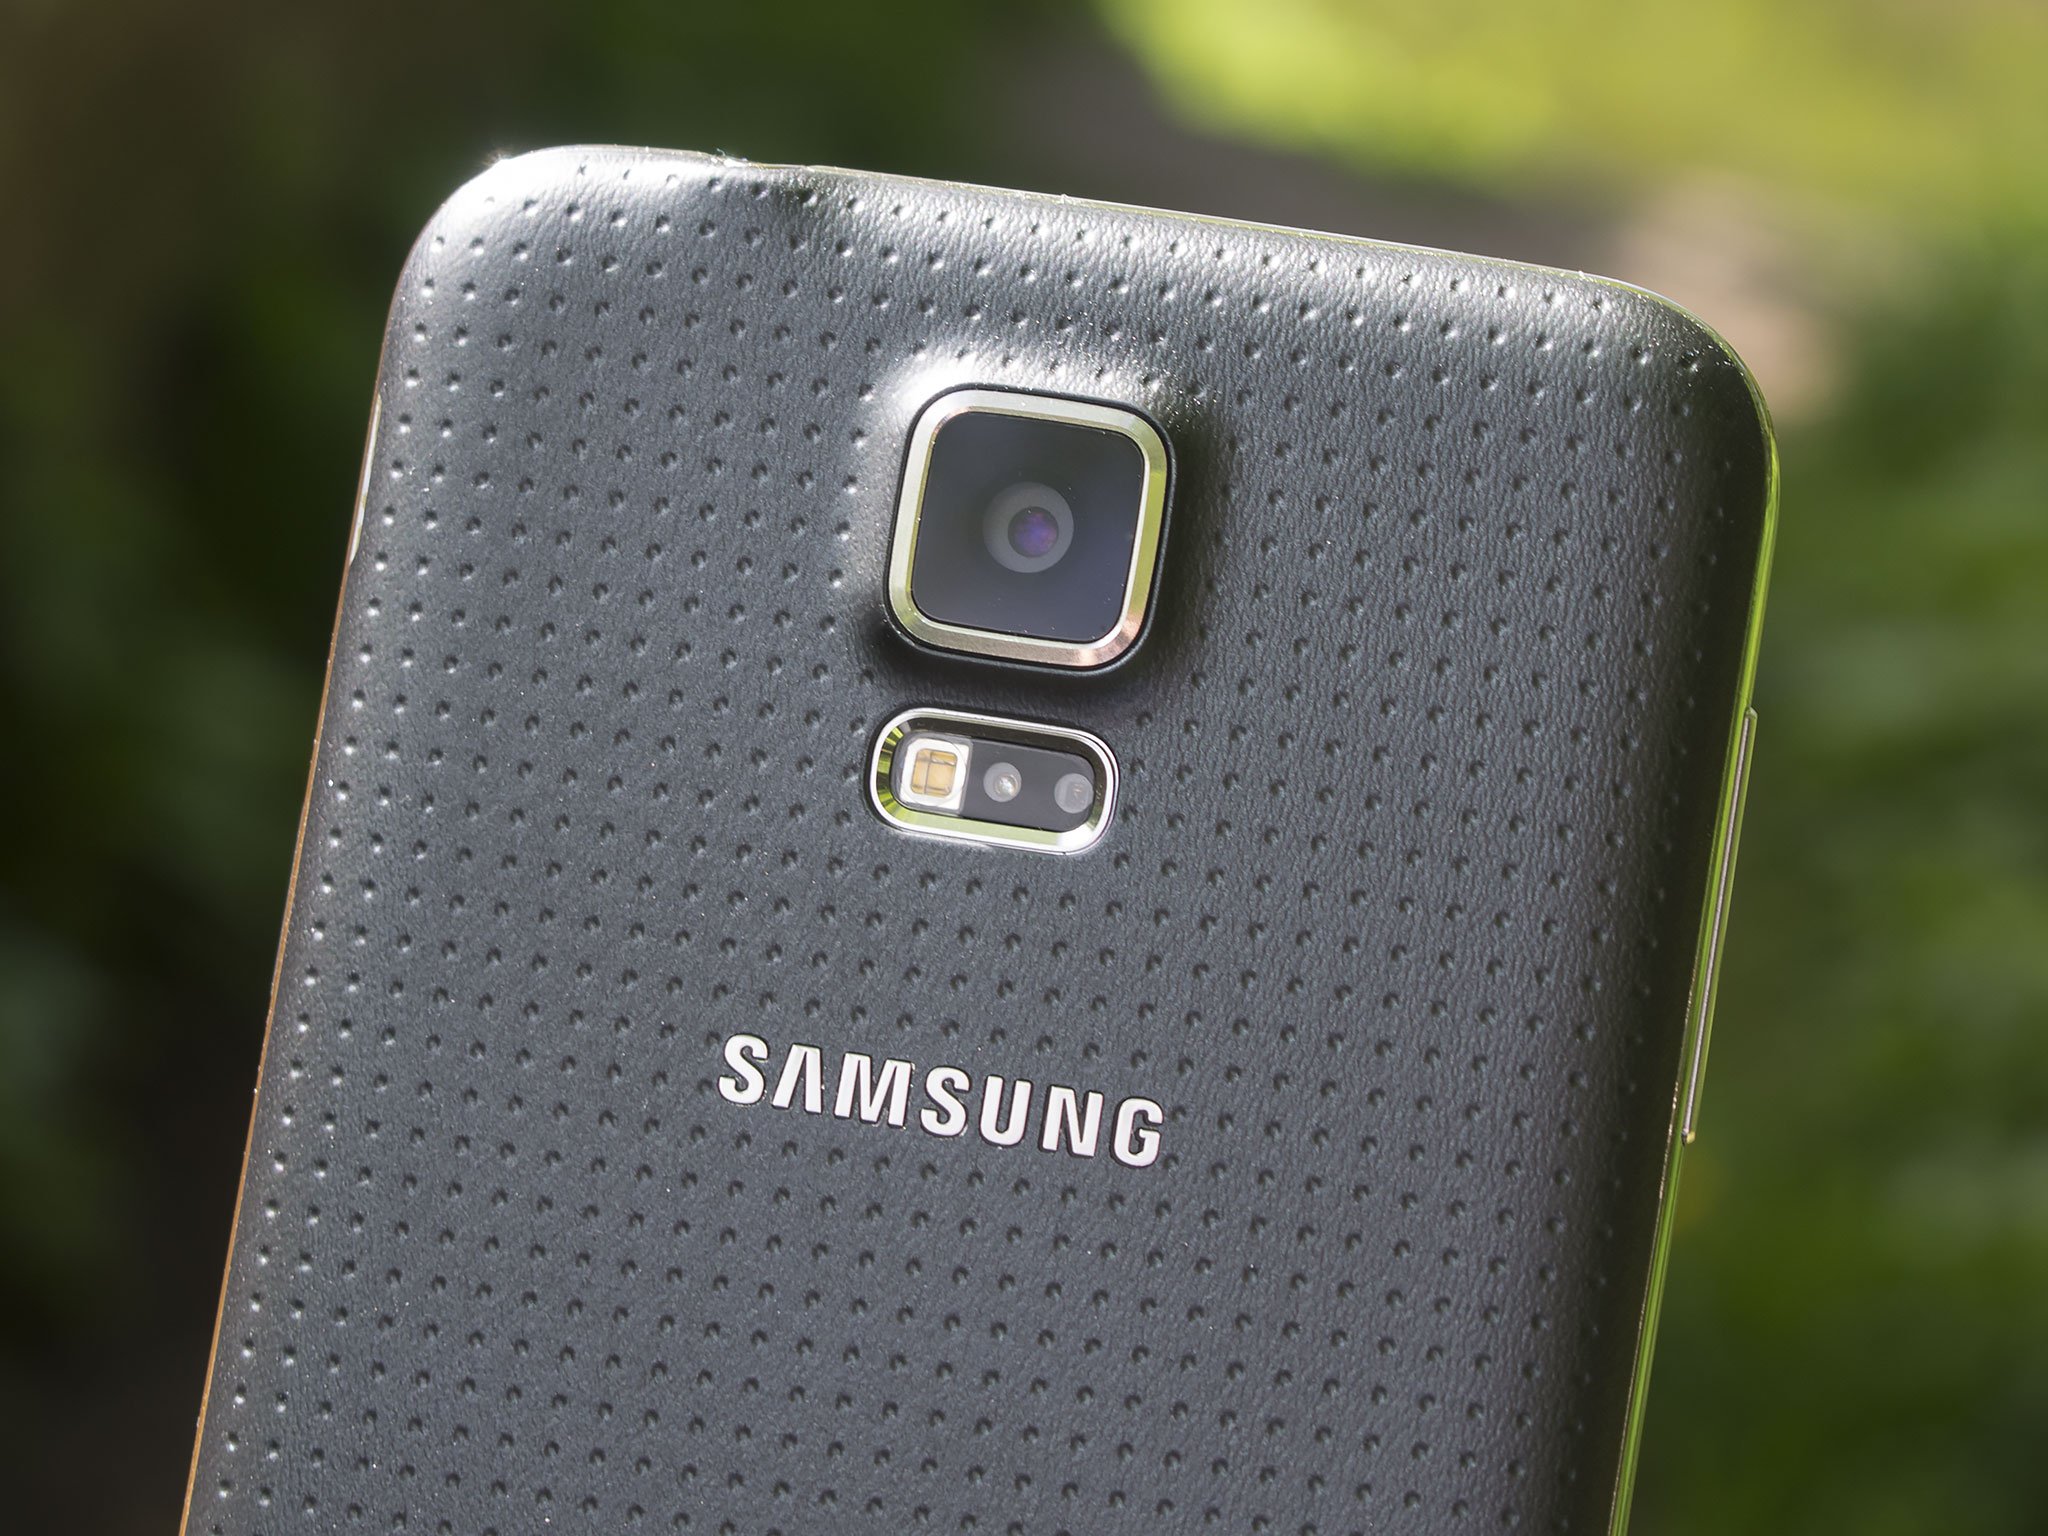 Some users report Galaxy S5 camera failures